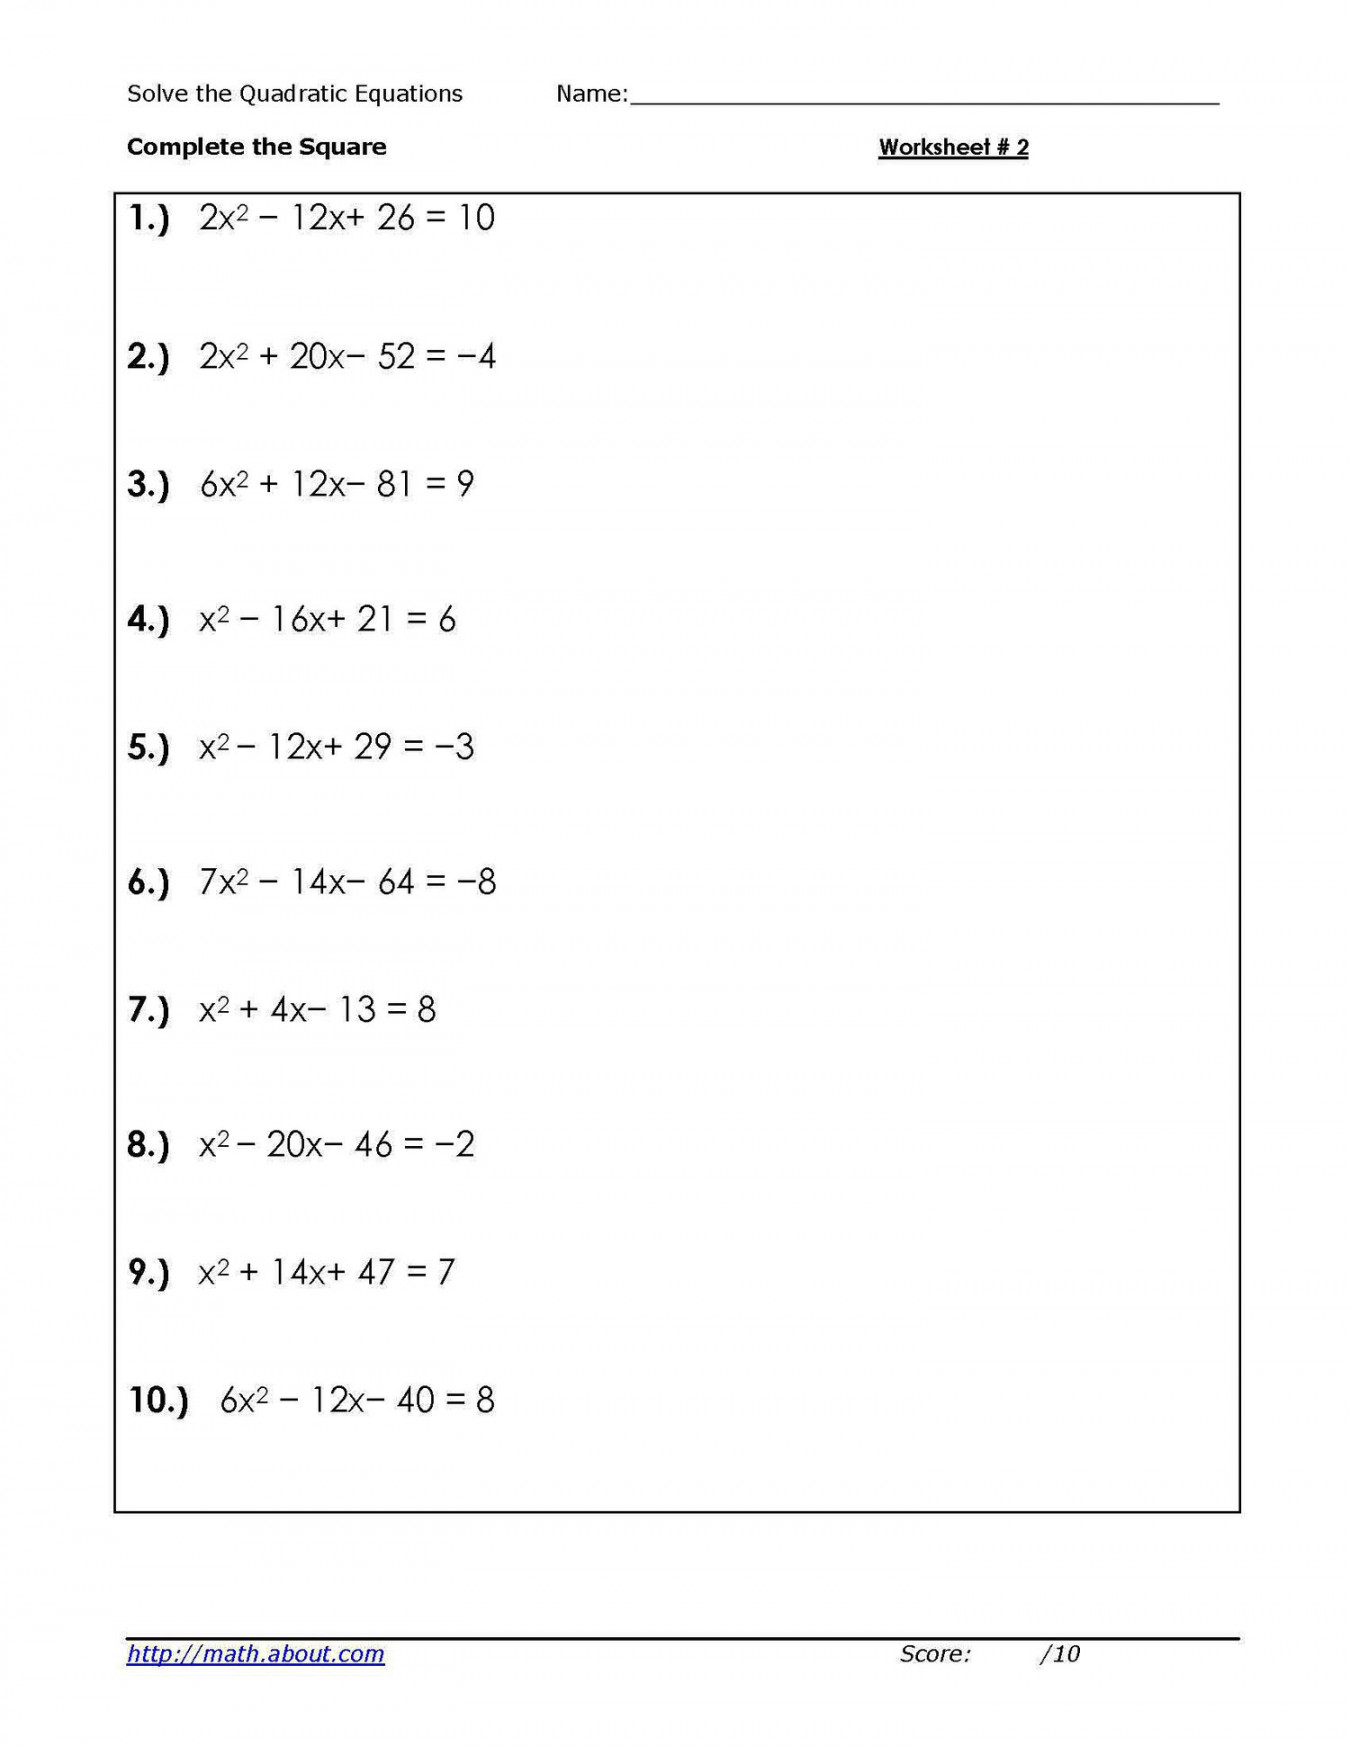 Solve Quadratic Equations by Competing the Square Worksheets